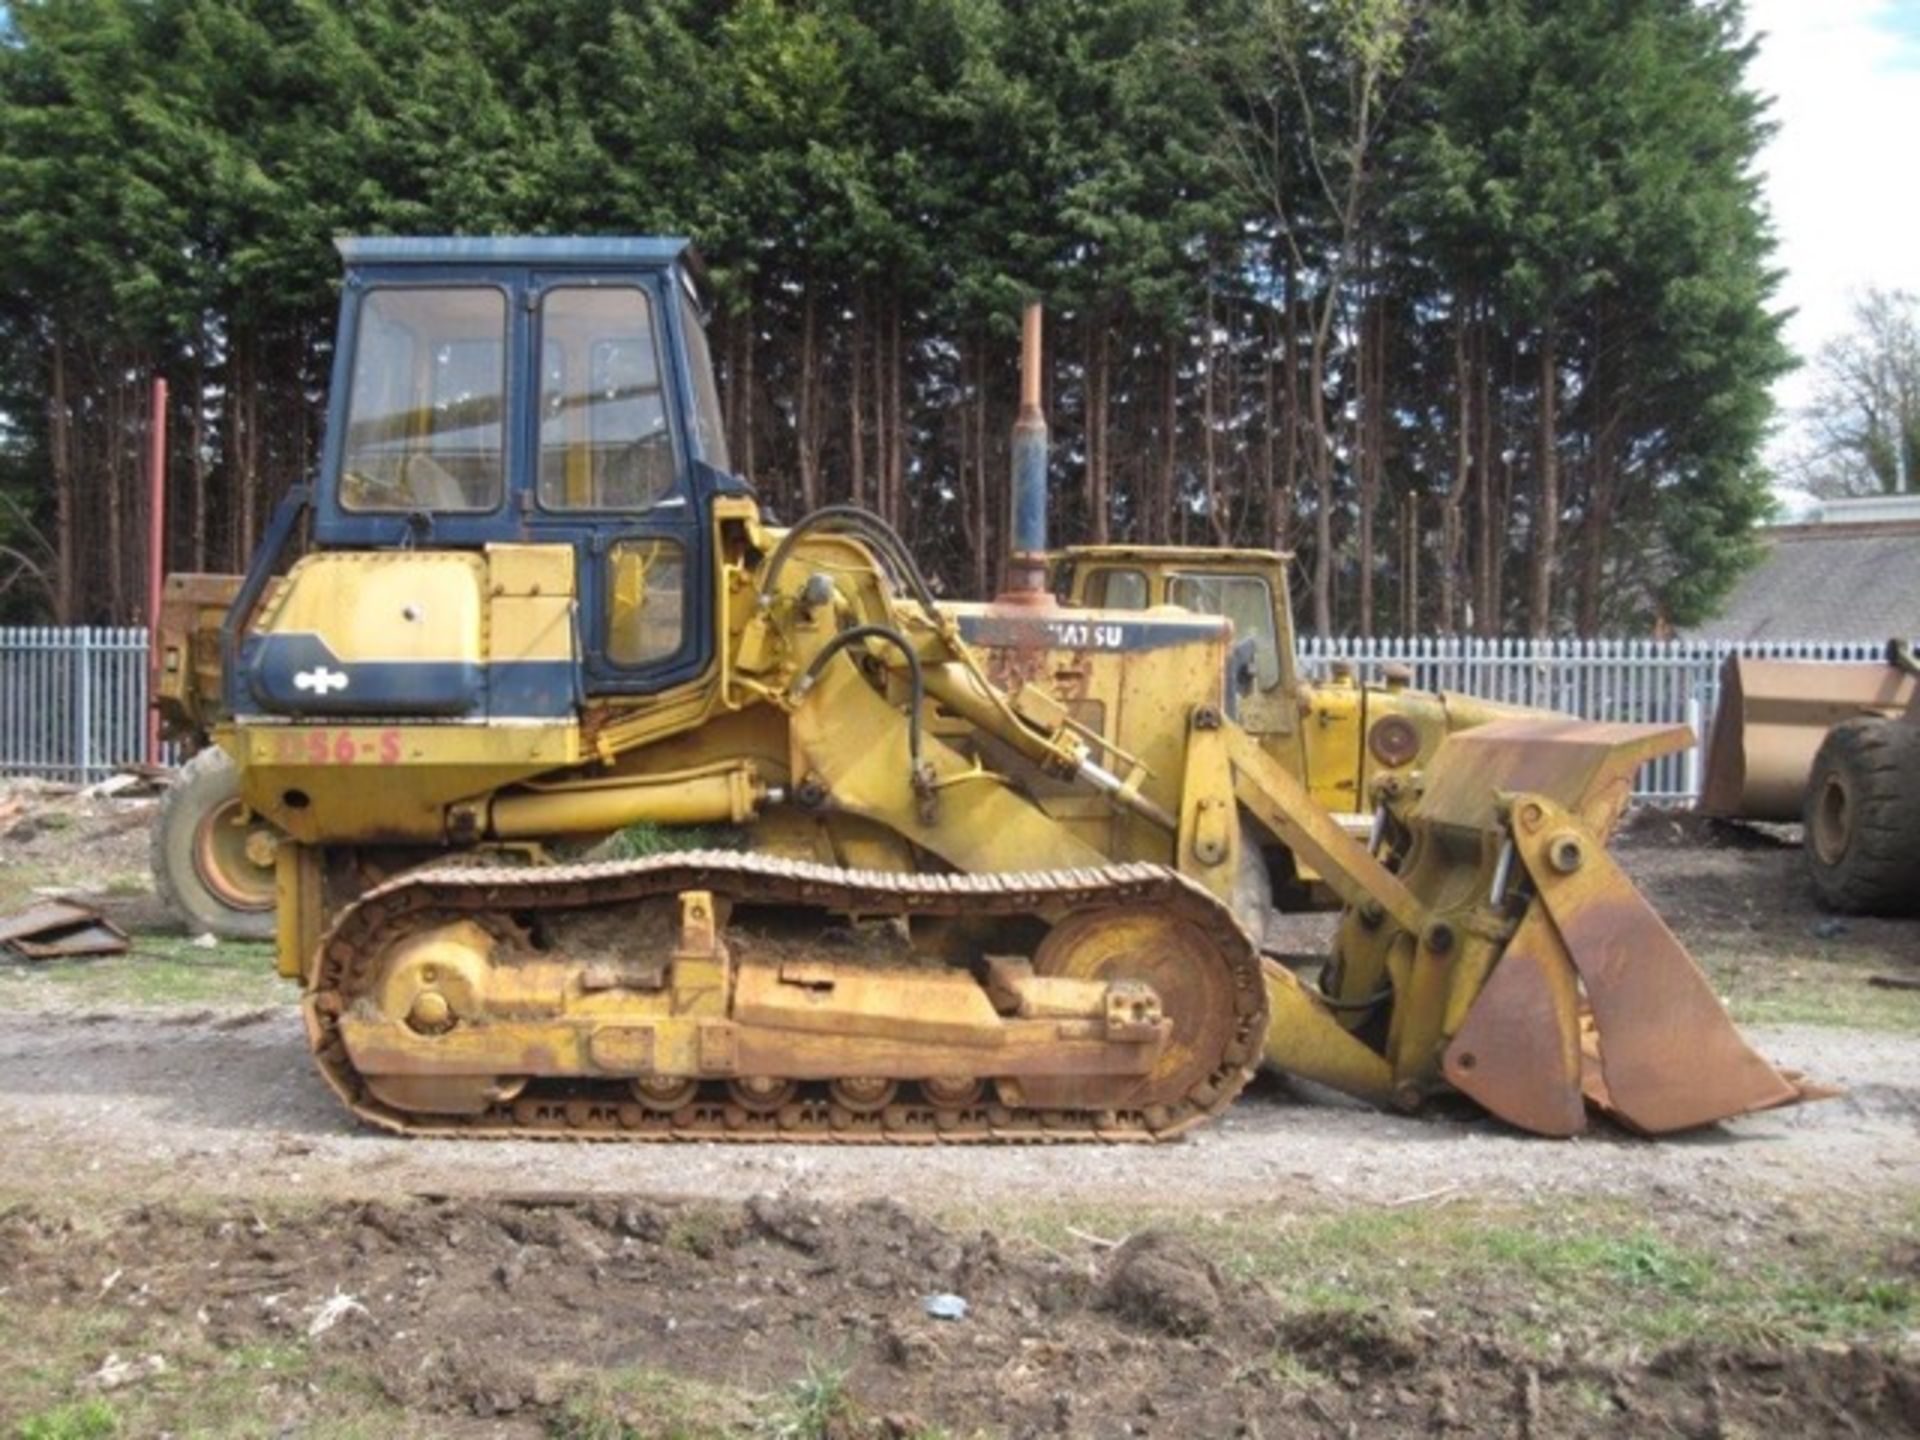 Komatsu Tracked Loading Shovel
Good condition for age, 4 in 1 bucket with teeth and good - Image 2 of 6